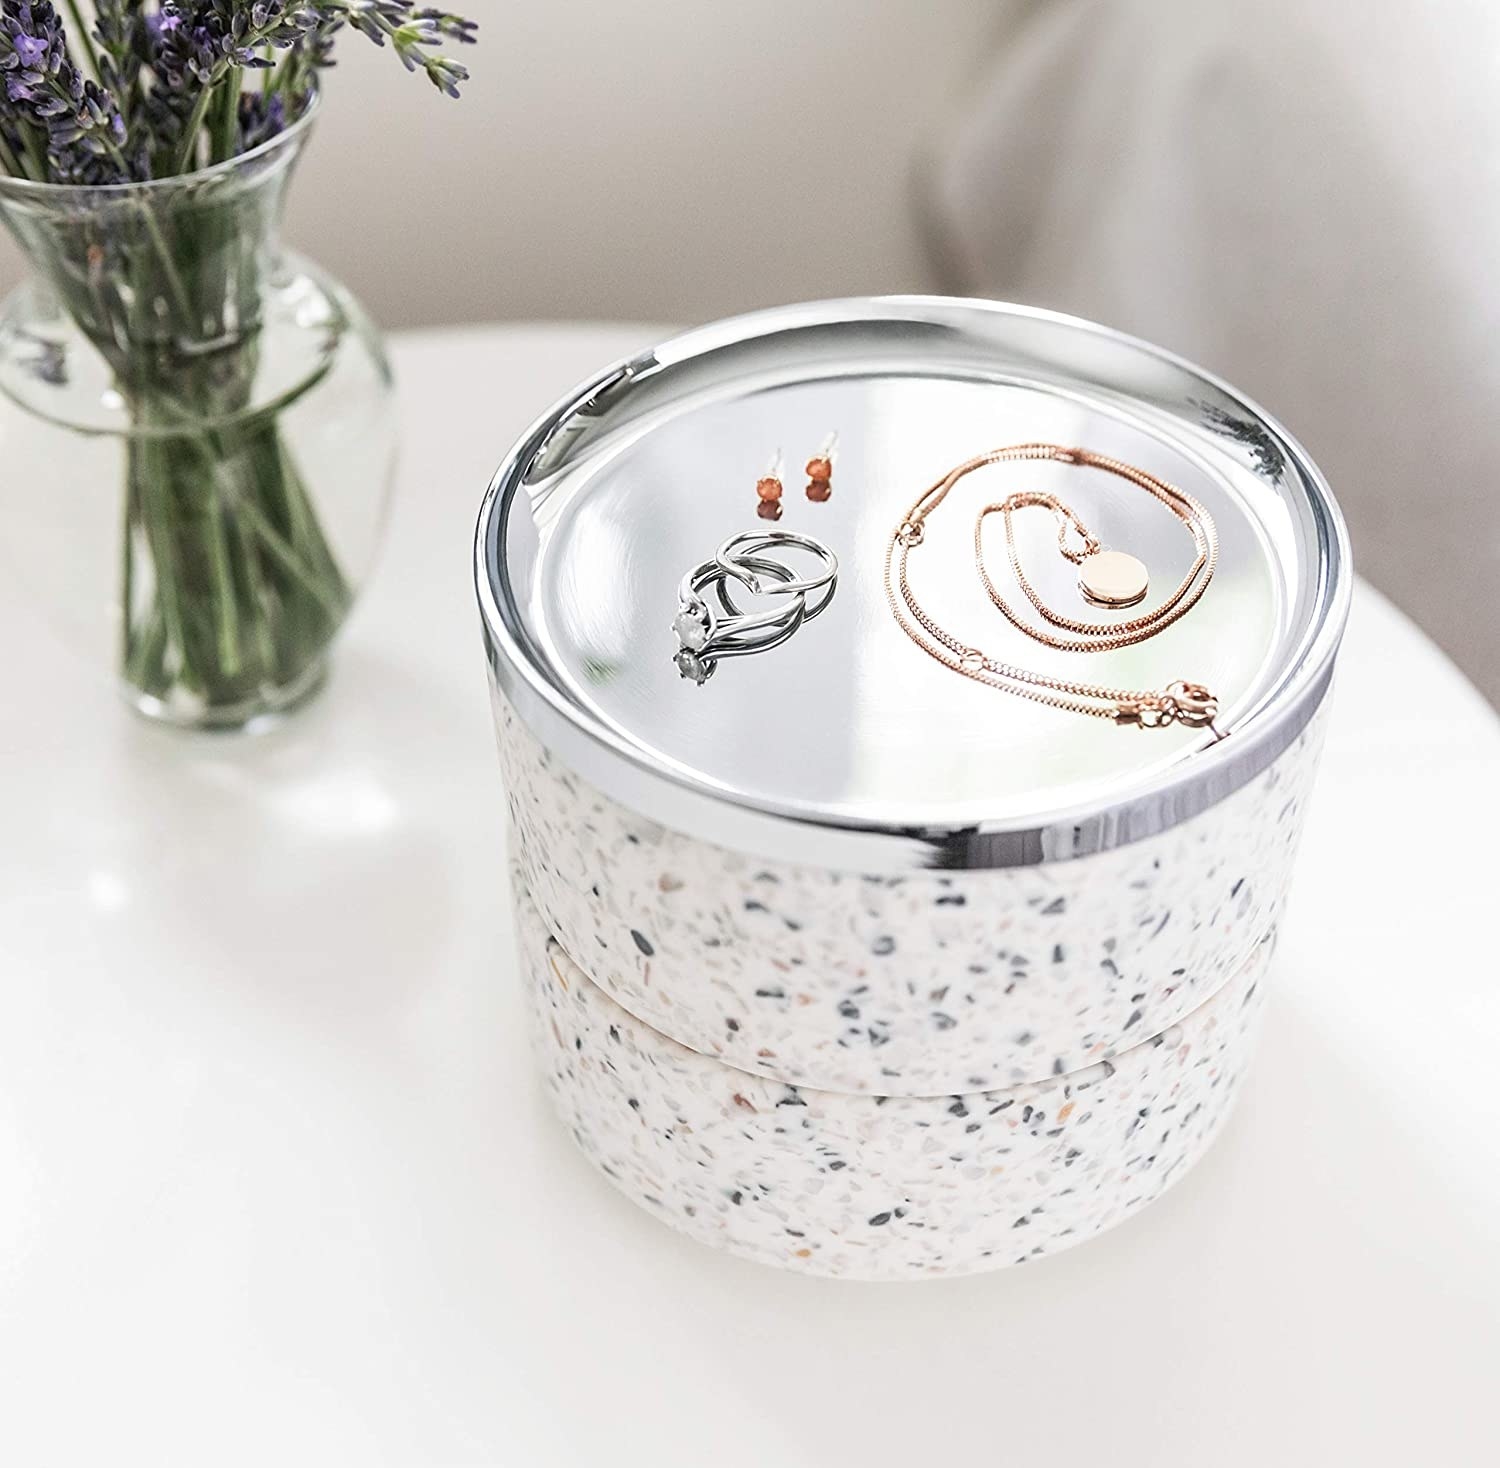 A terrazzo-patterned tiered jewelry box on a counter